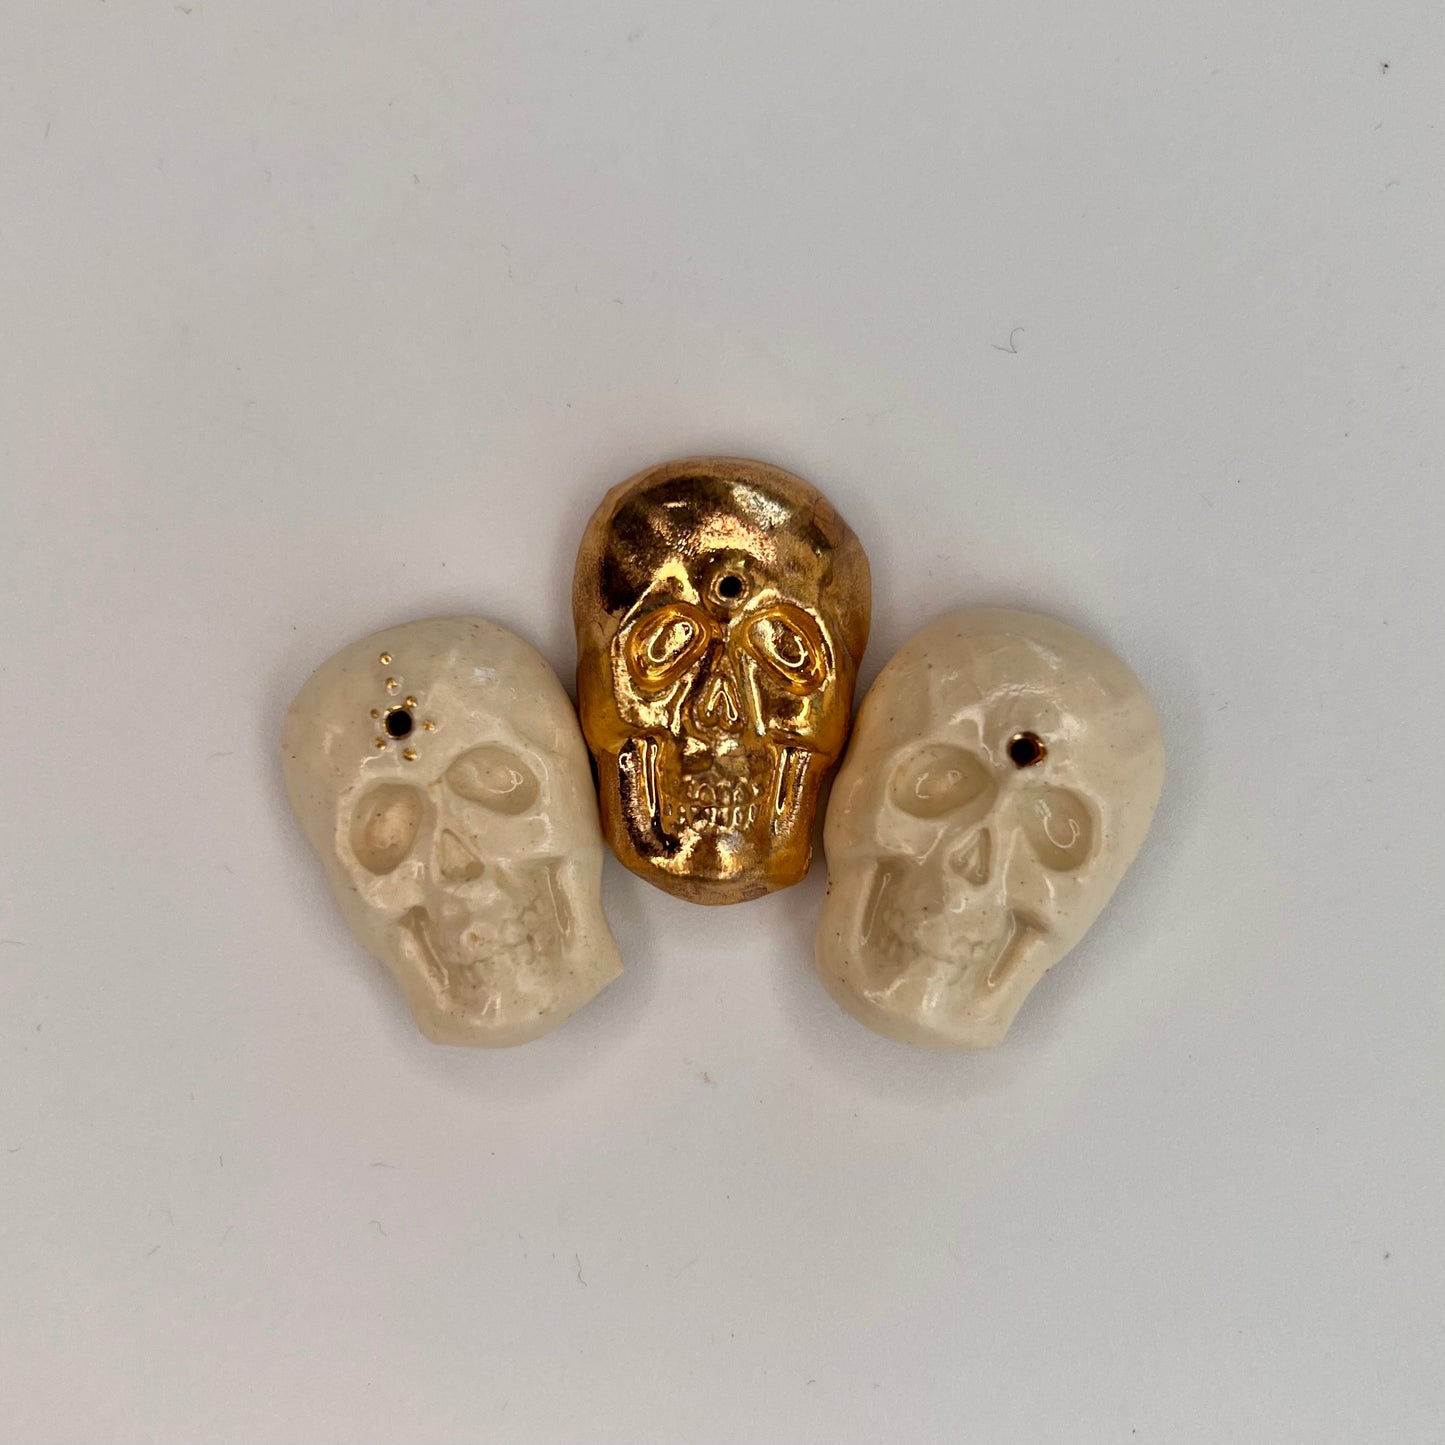 Seconds & Samples - Skull Beads Set - 1 inch individual beads, crafted as Skulls measuring 1 inch high